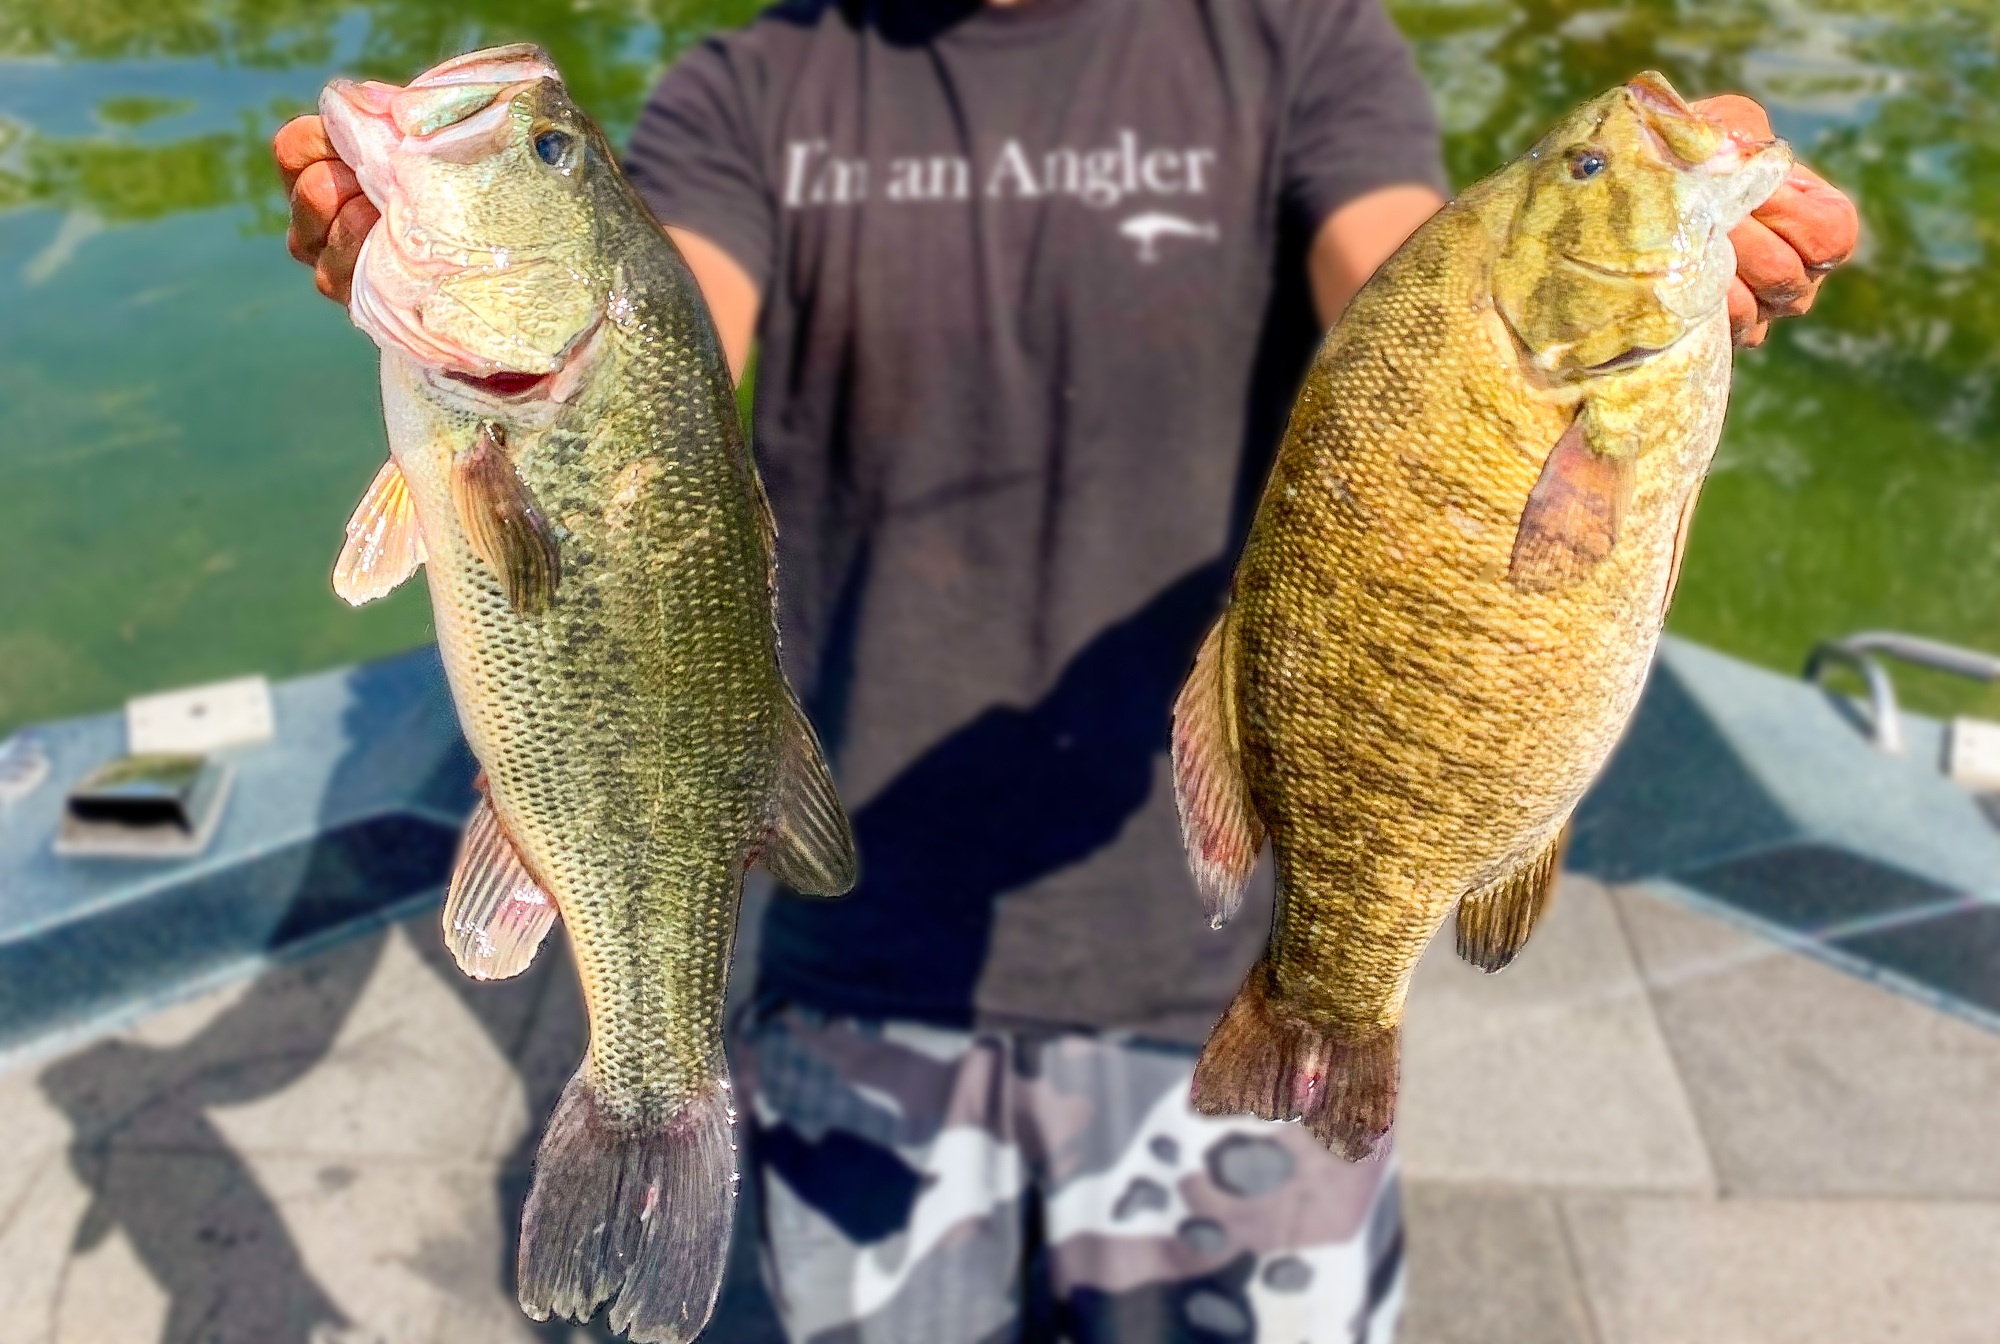 A side-by-side comparison of largemouth and smallmouth bass, held up by an angler.